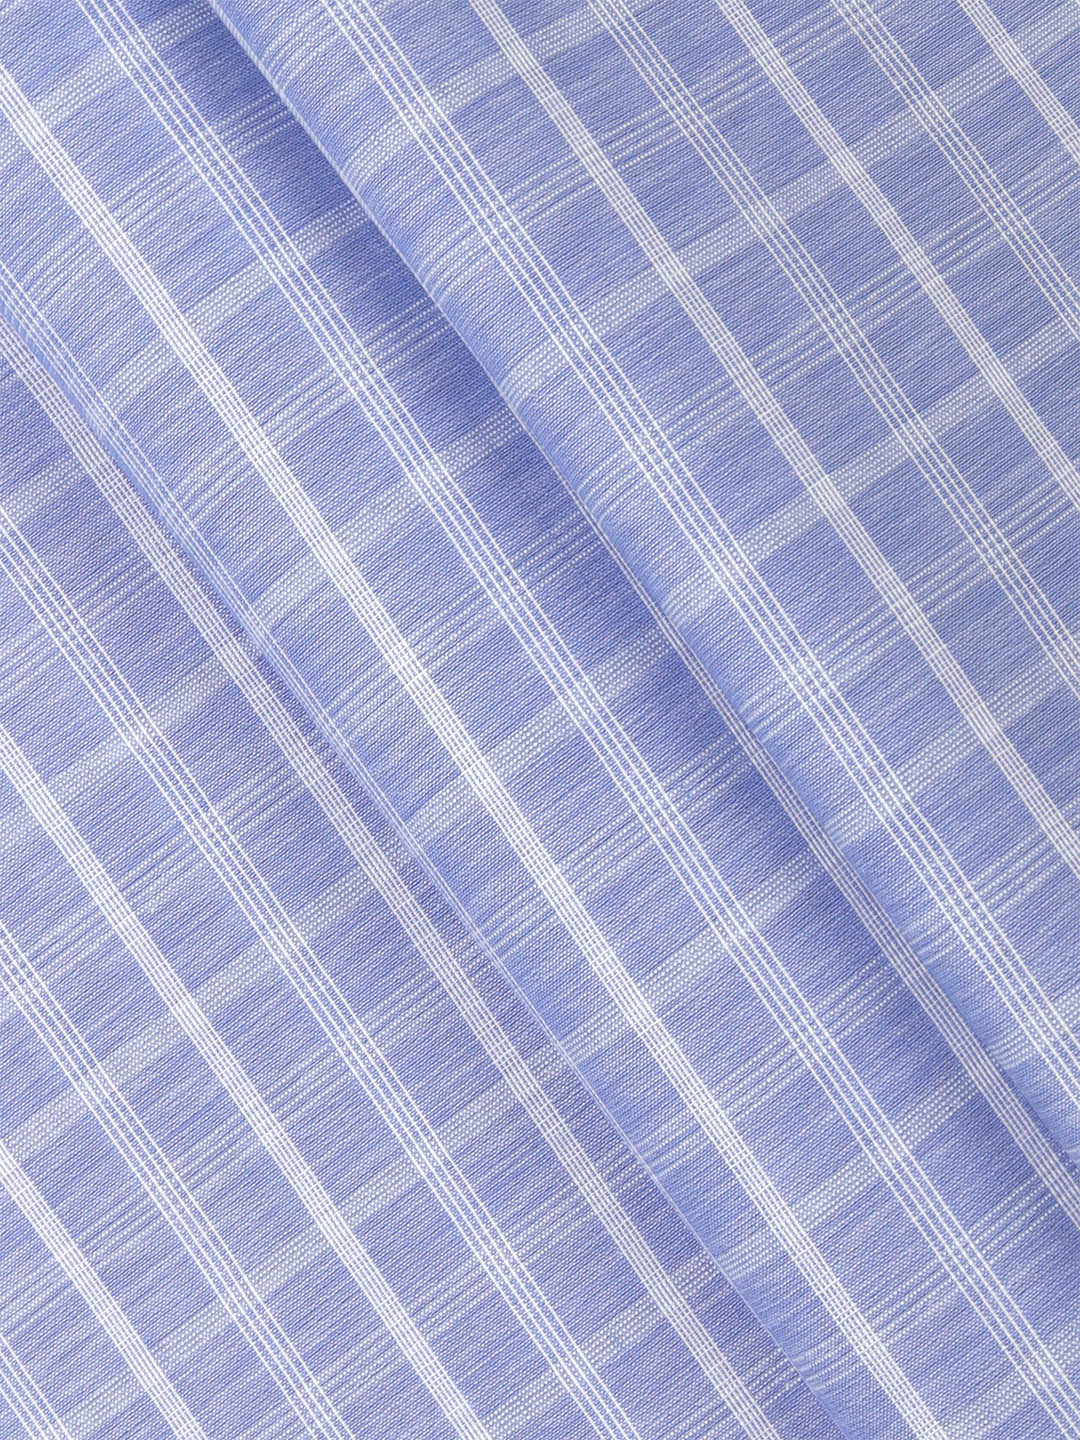 Cotton Checks Violet Colour Traditional Shirting Fabric High Style